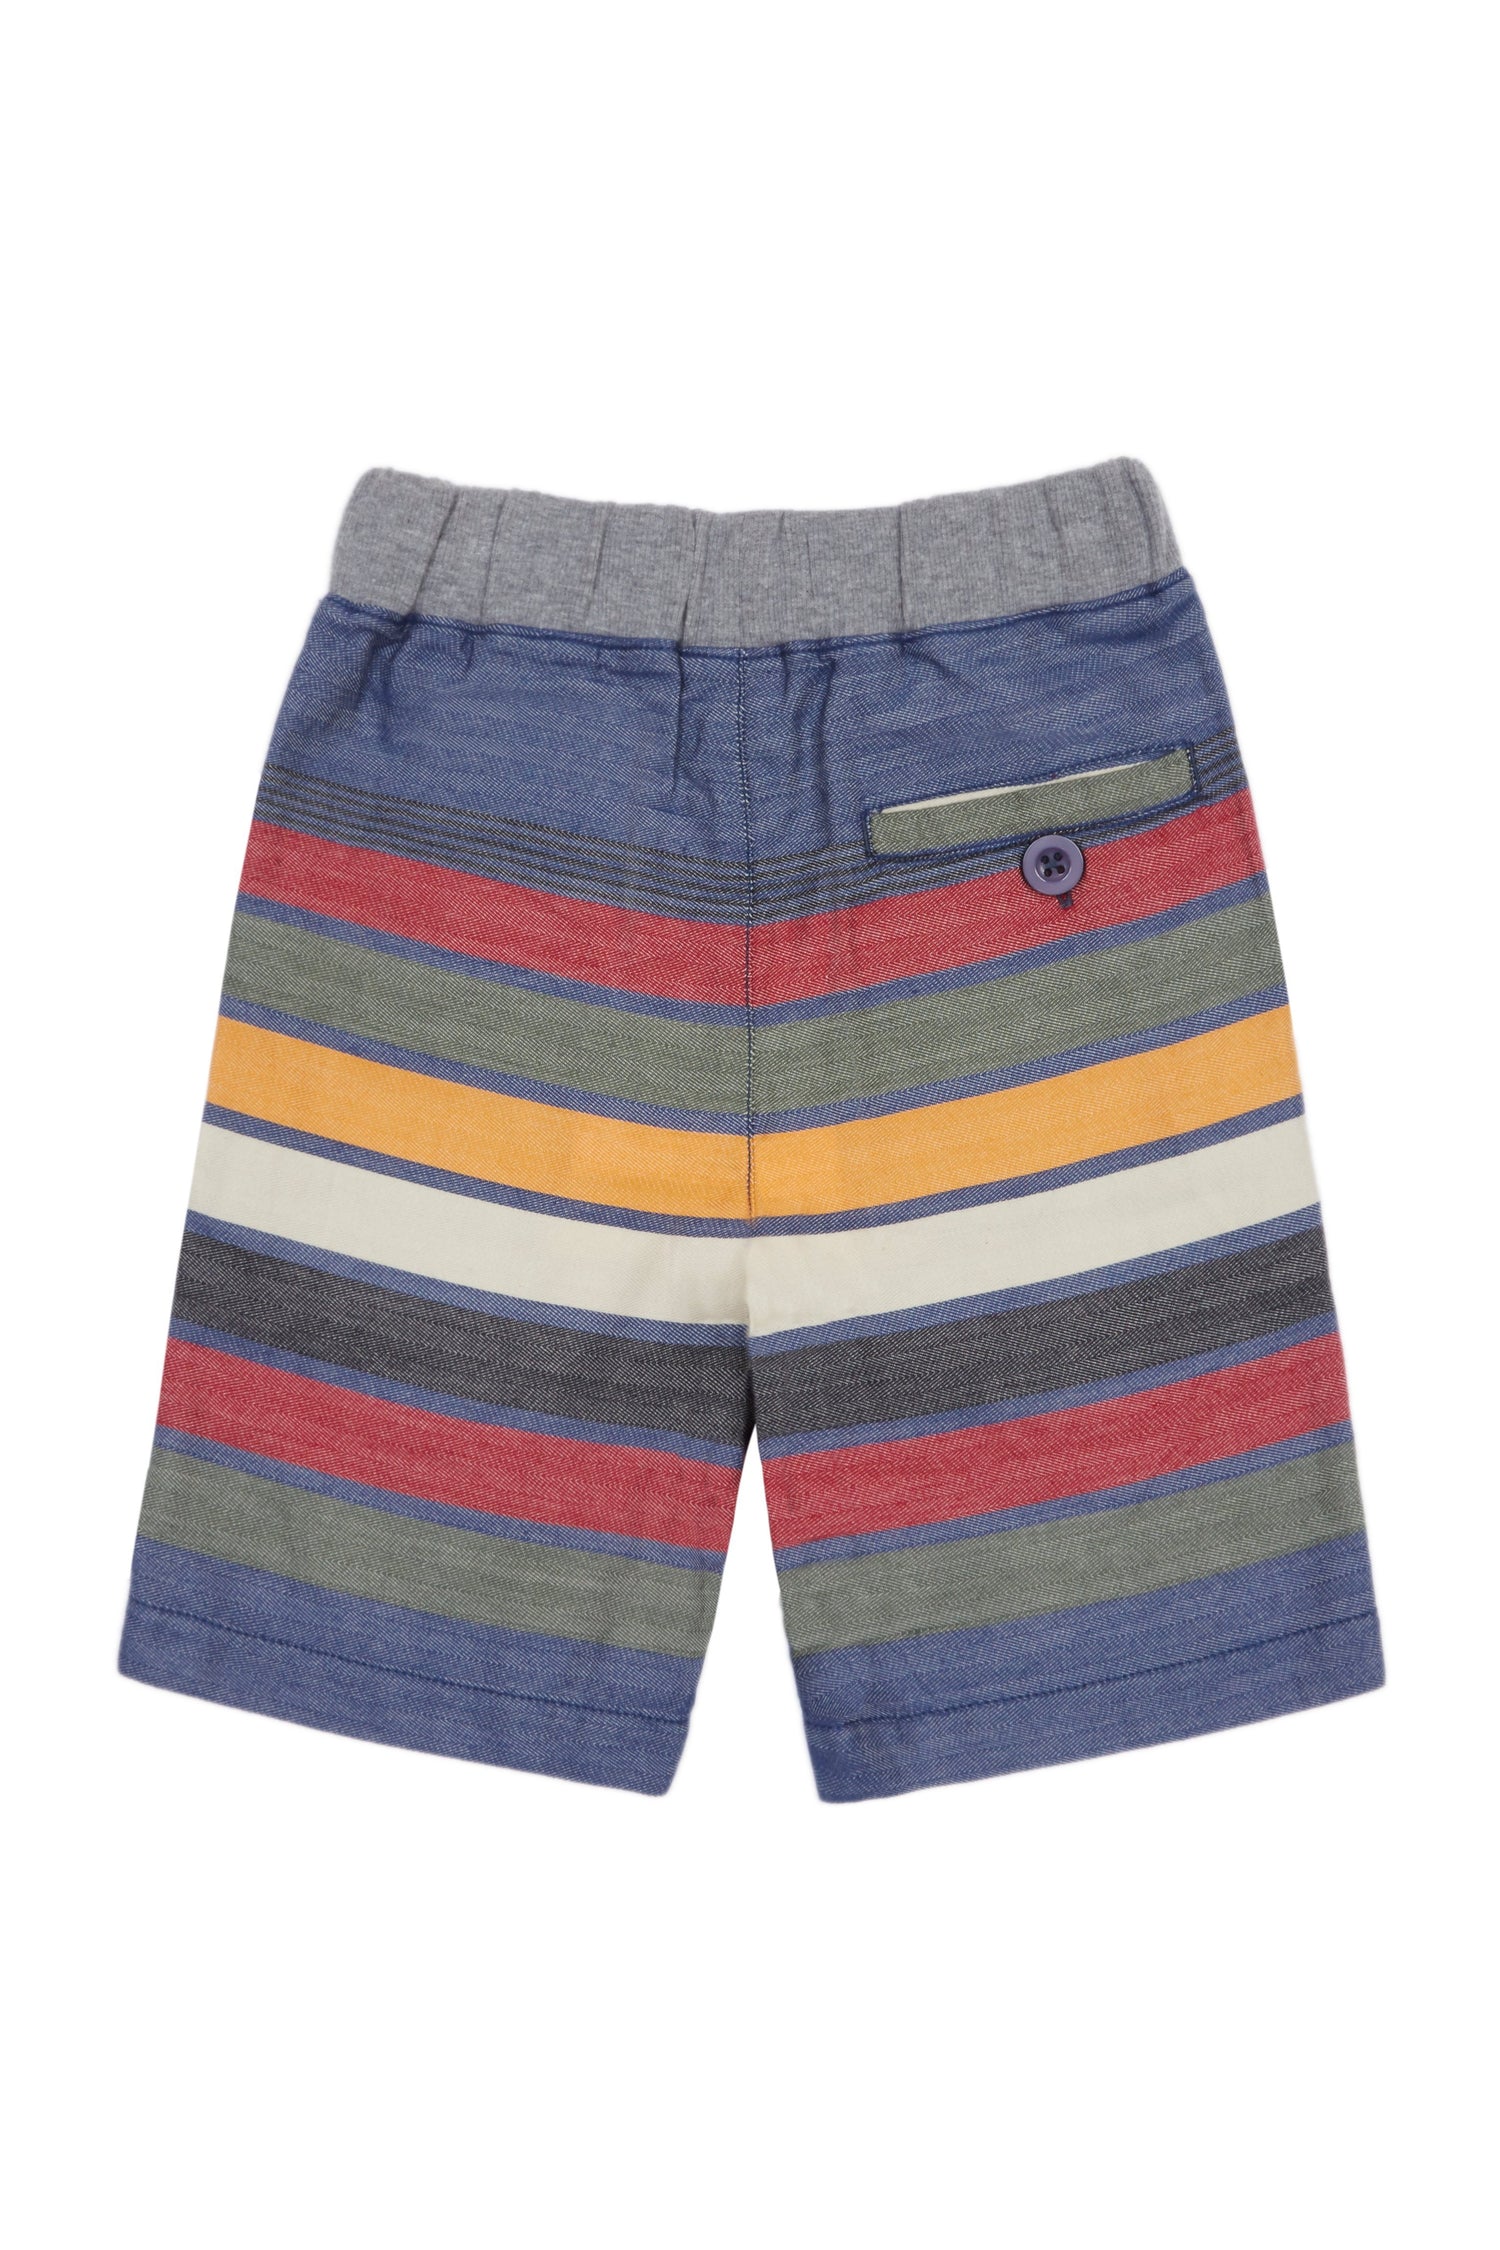 Back of blue, red and green striped shorts with elastic waist and one back pocket. 